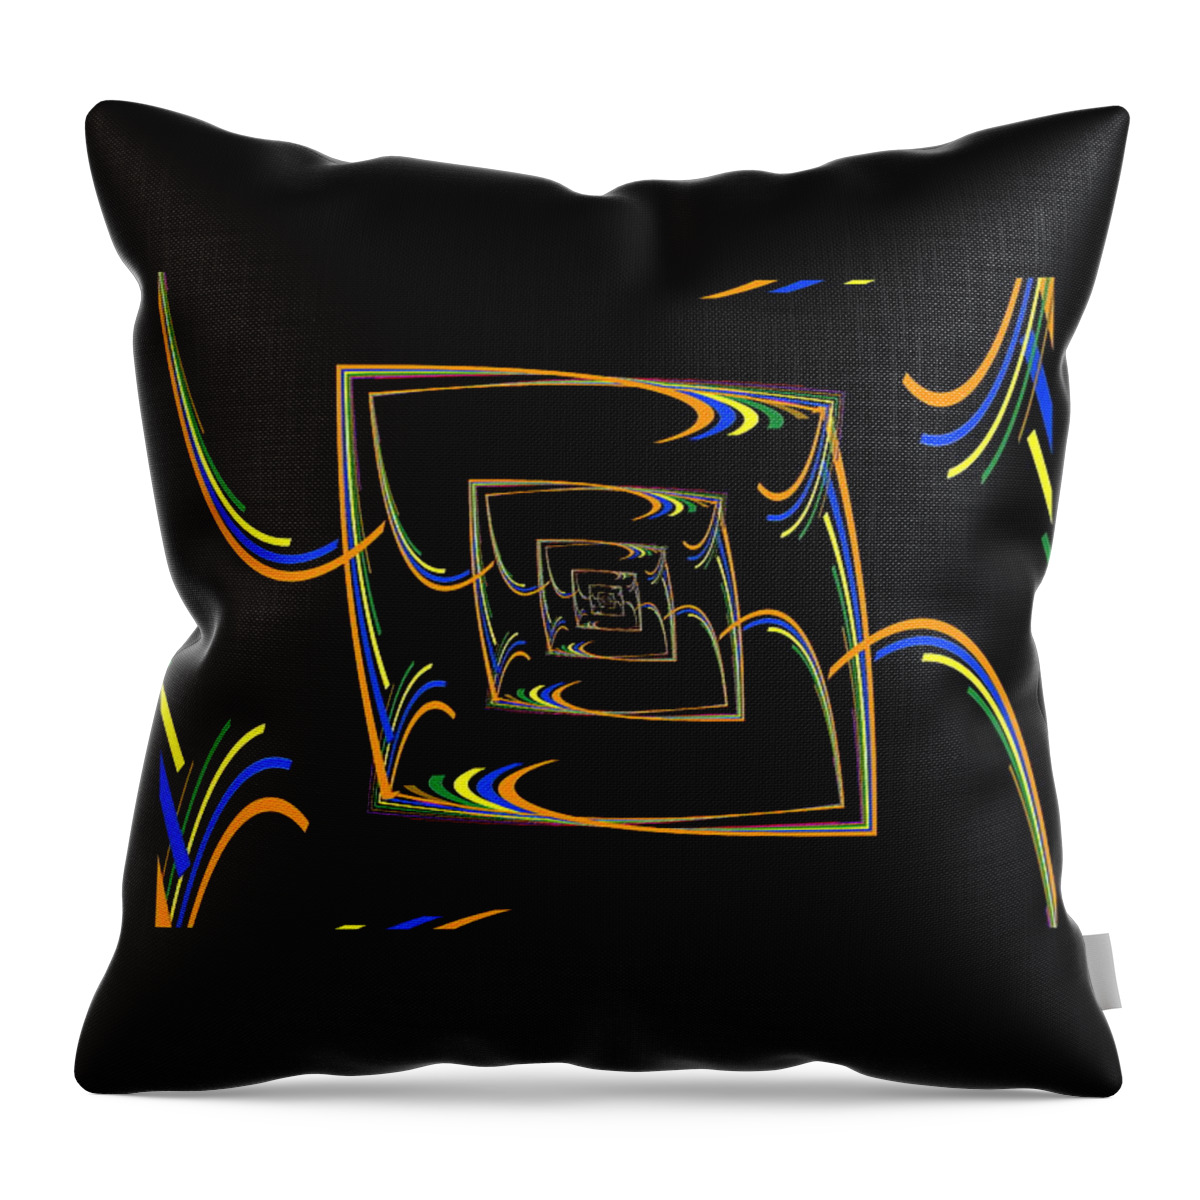 Abstract Throw Pillow featuring the digital art Kinetic Rainbow 6 by Tim Allen